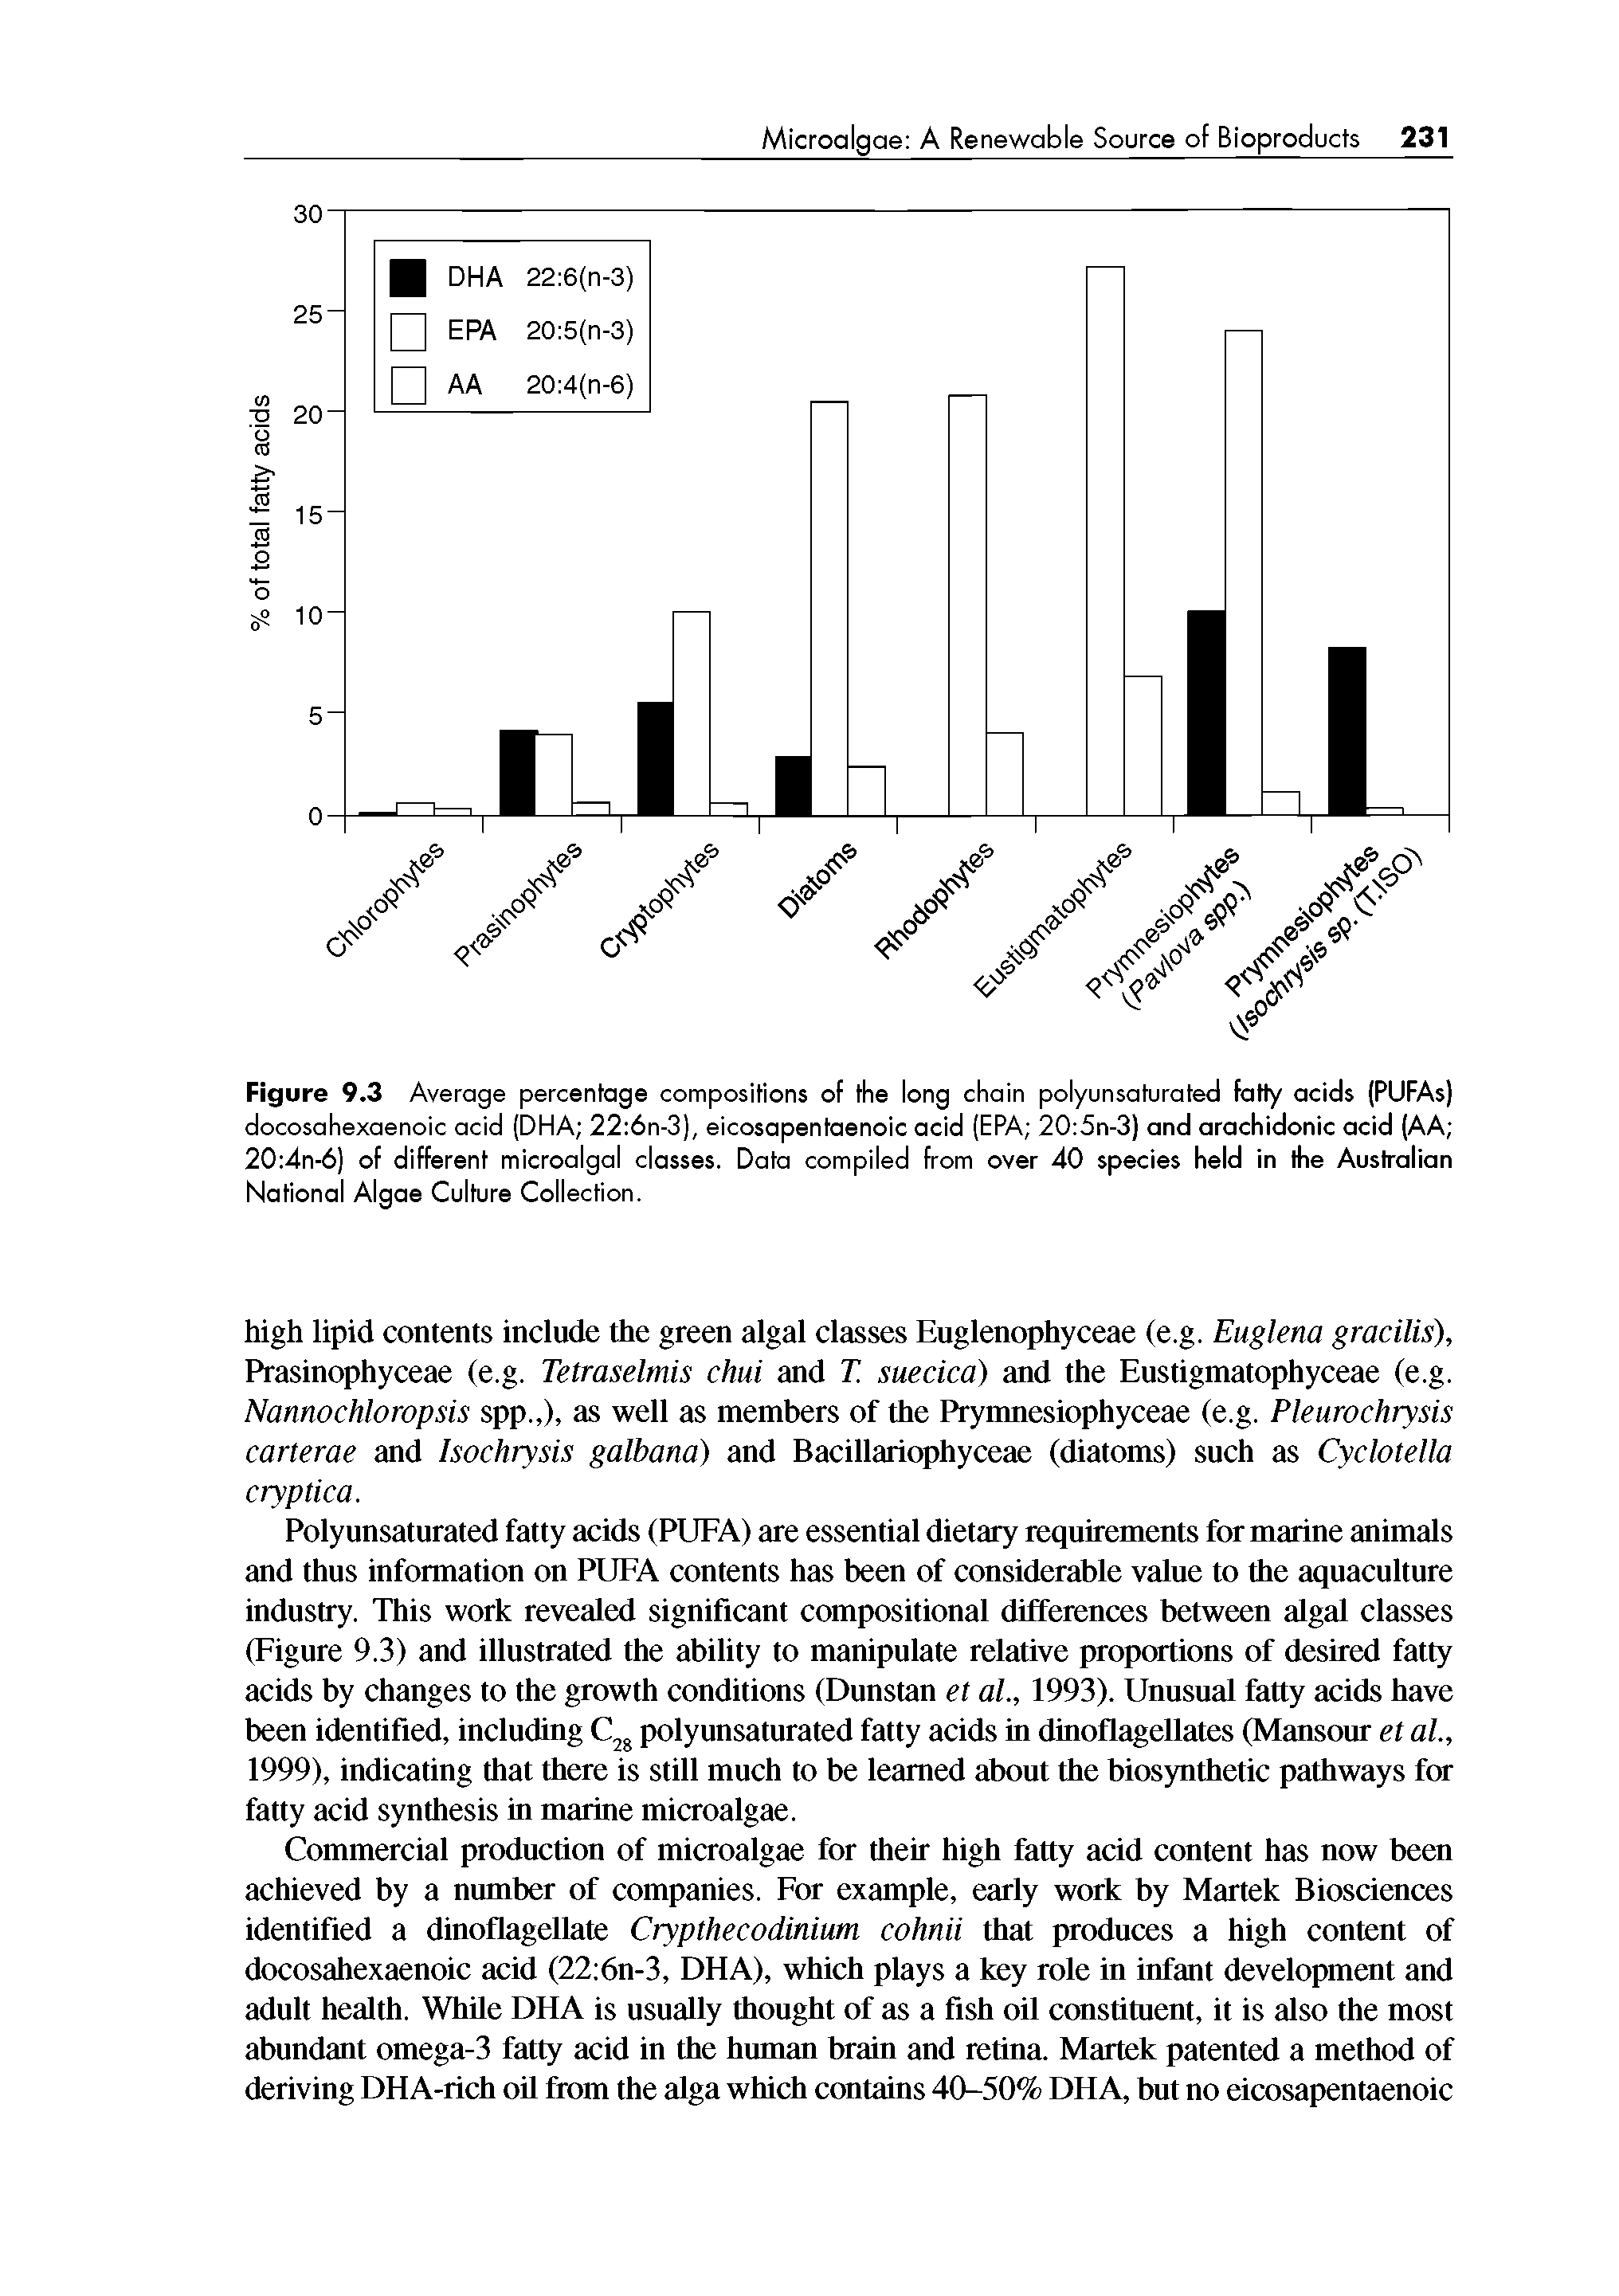 Figure 9.3 Average percentage compositions of the long chain polyunsaturated fatly acids (PUFAs) docosahexaenoic acid (DHA 22 6n-3), eicosapentaenoic acid (EPA 20 5n-3) and arachidonic acid (AA 20 4n-6) of different microalgal classes. Data compiled from over 40 species held in the Australian National Algae Culture Collection.